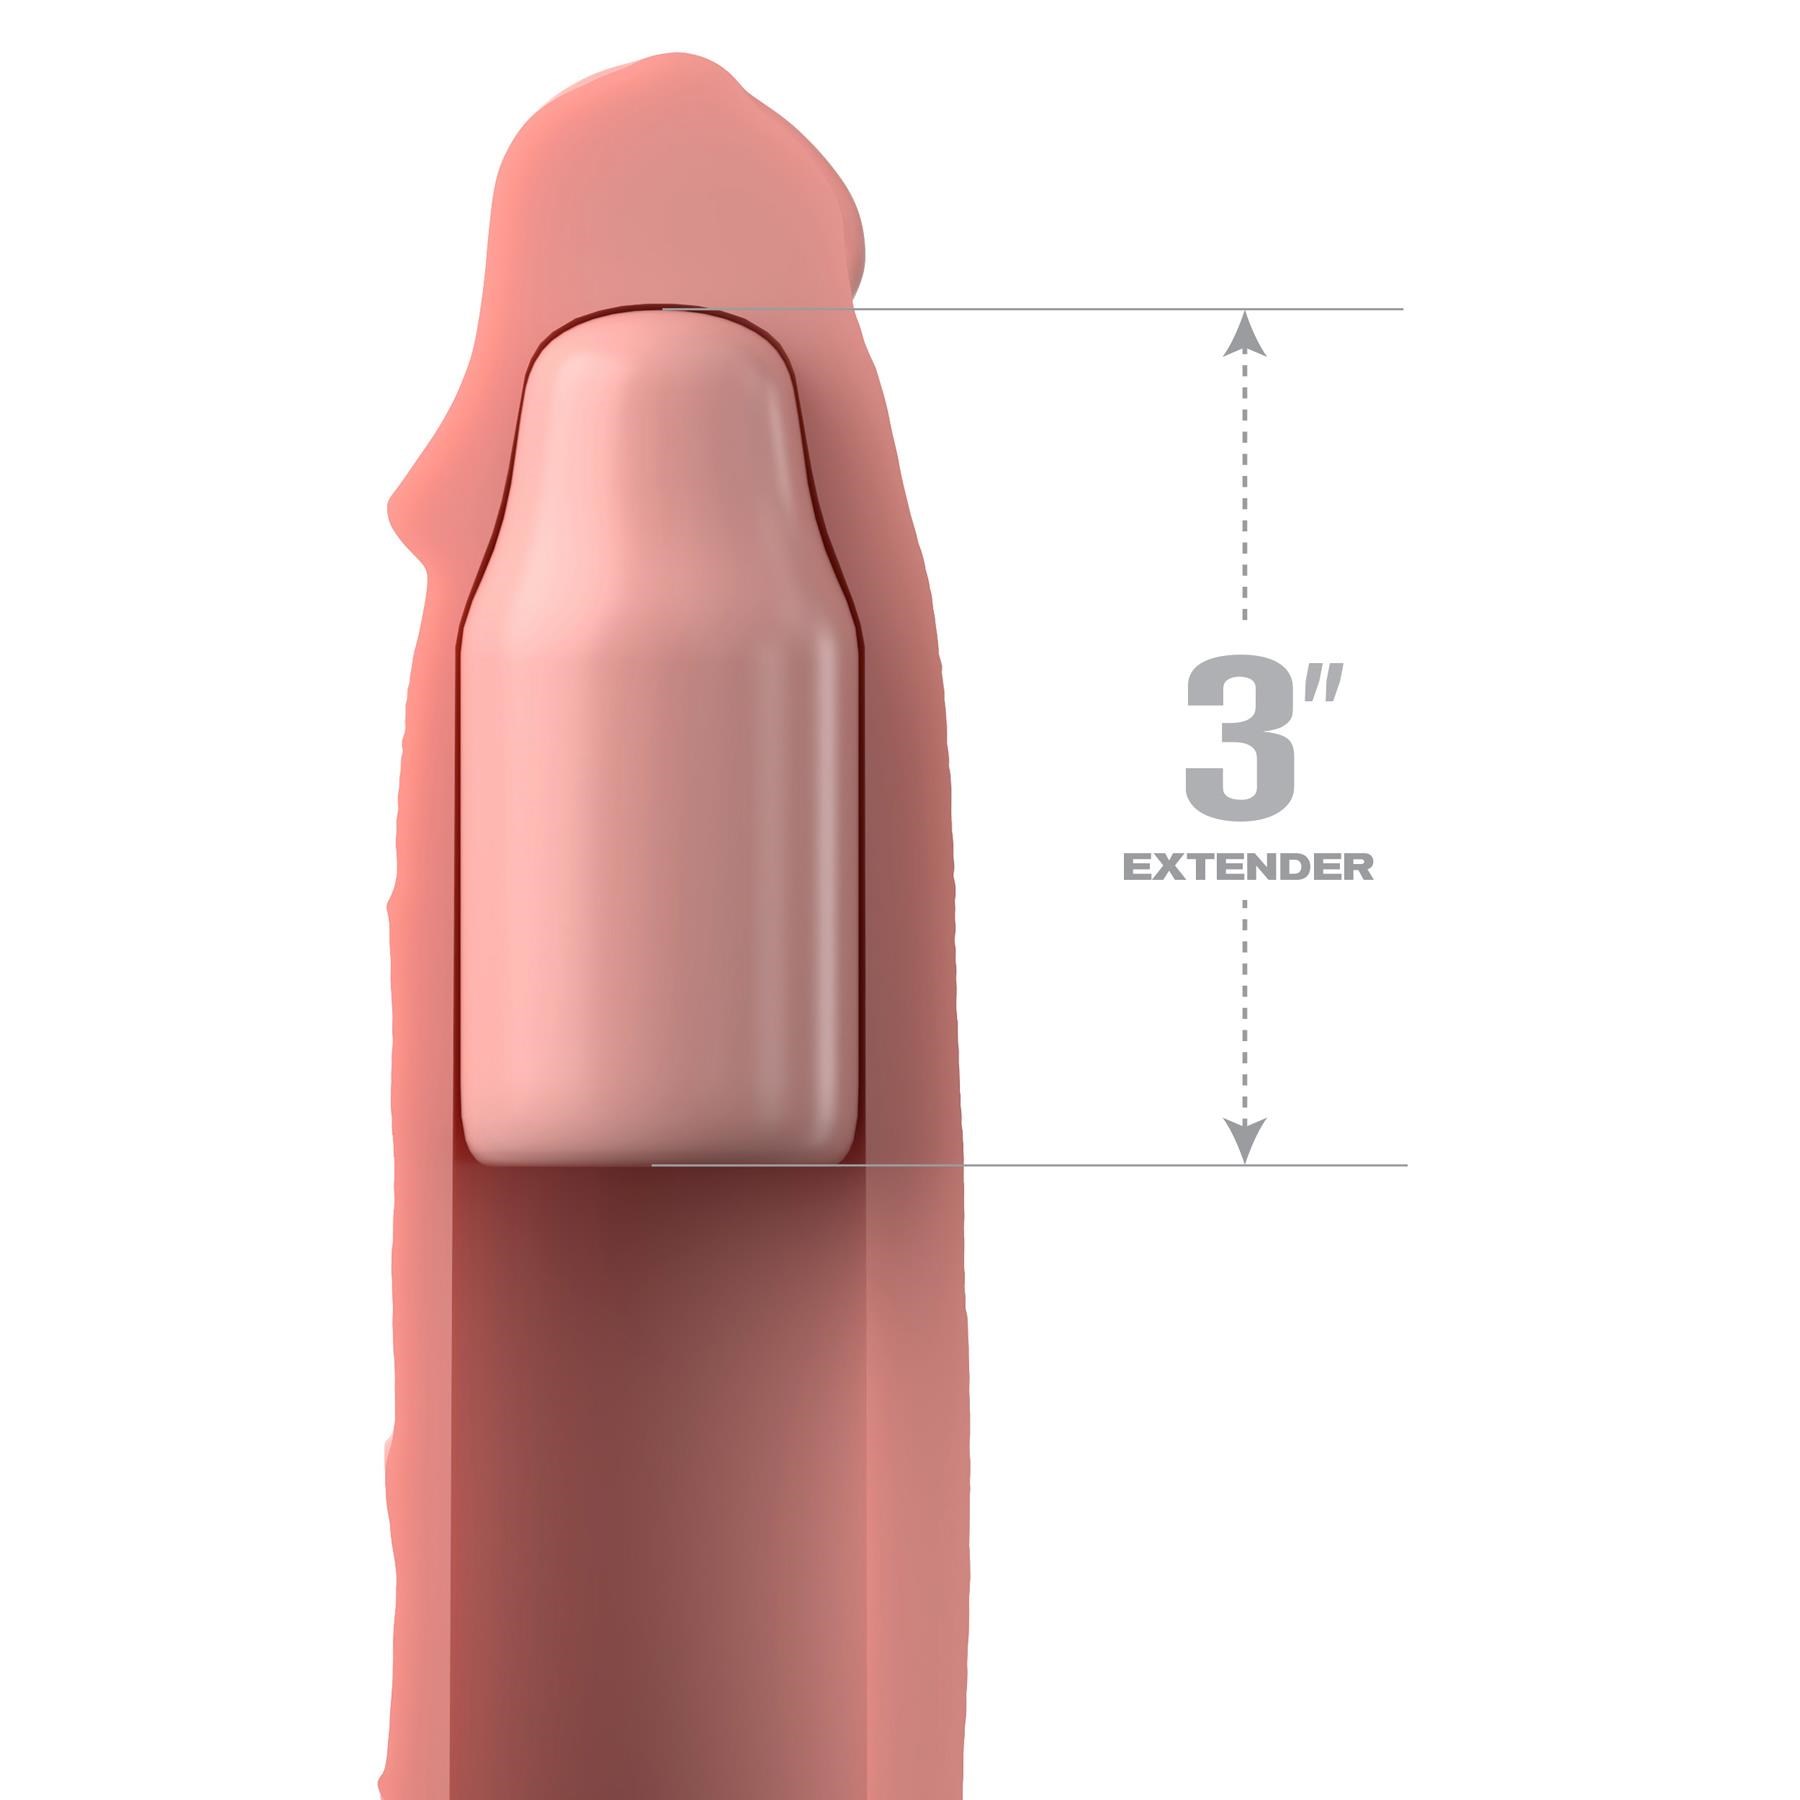 Fantasy X-Tensions Elite 3" Silicone Extension - Inside Showing Extension Tip - White